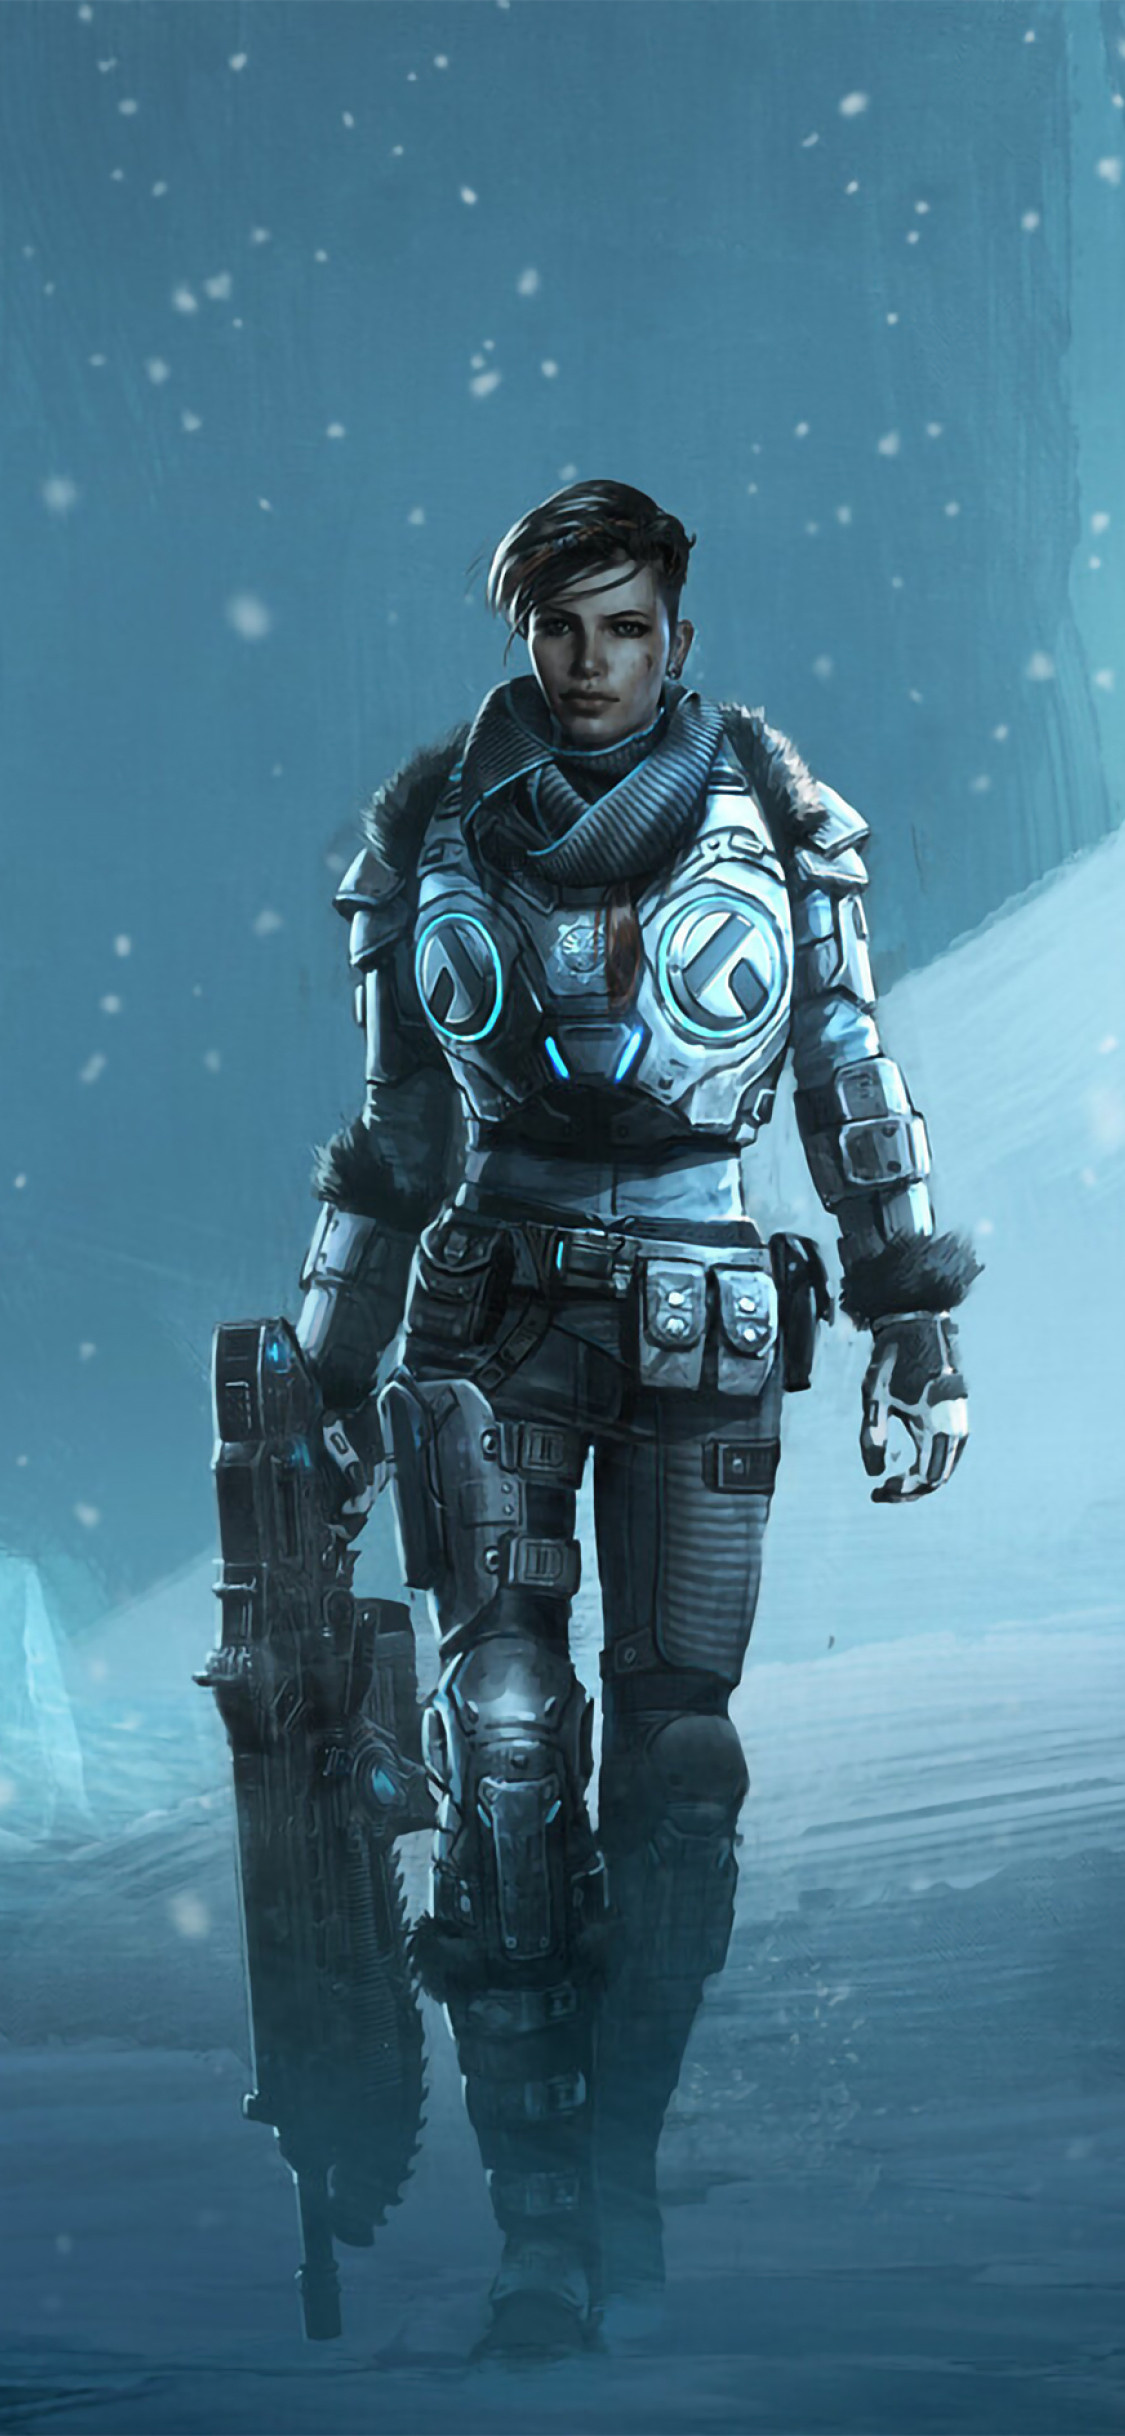 Gears 5, Gaming, Phone wallpapers, Phone backgrounds, 1130x2440 HD Handy